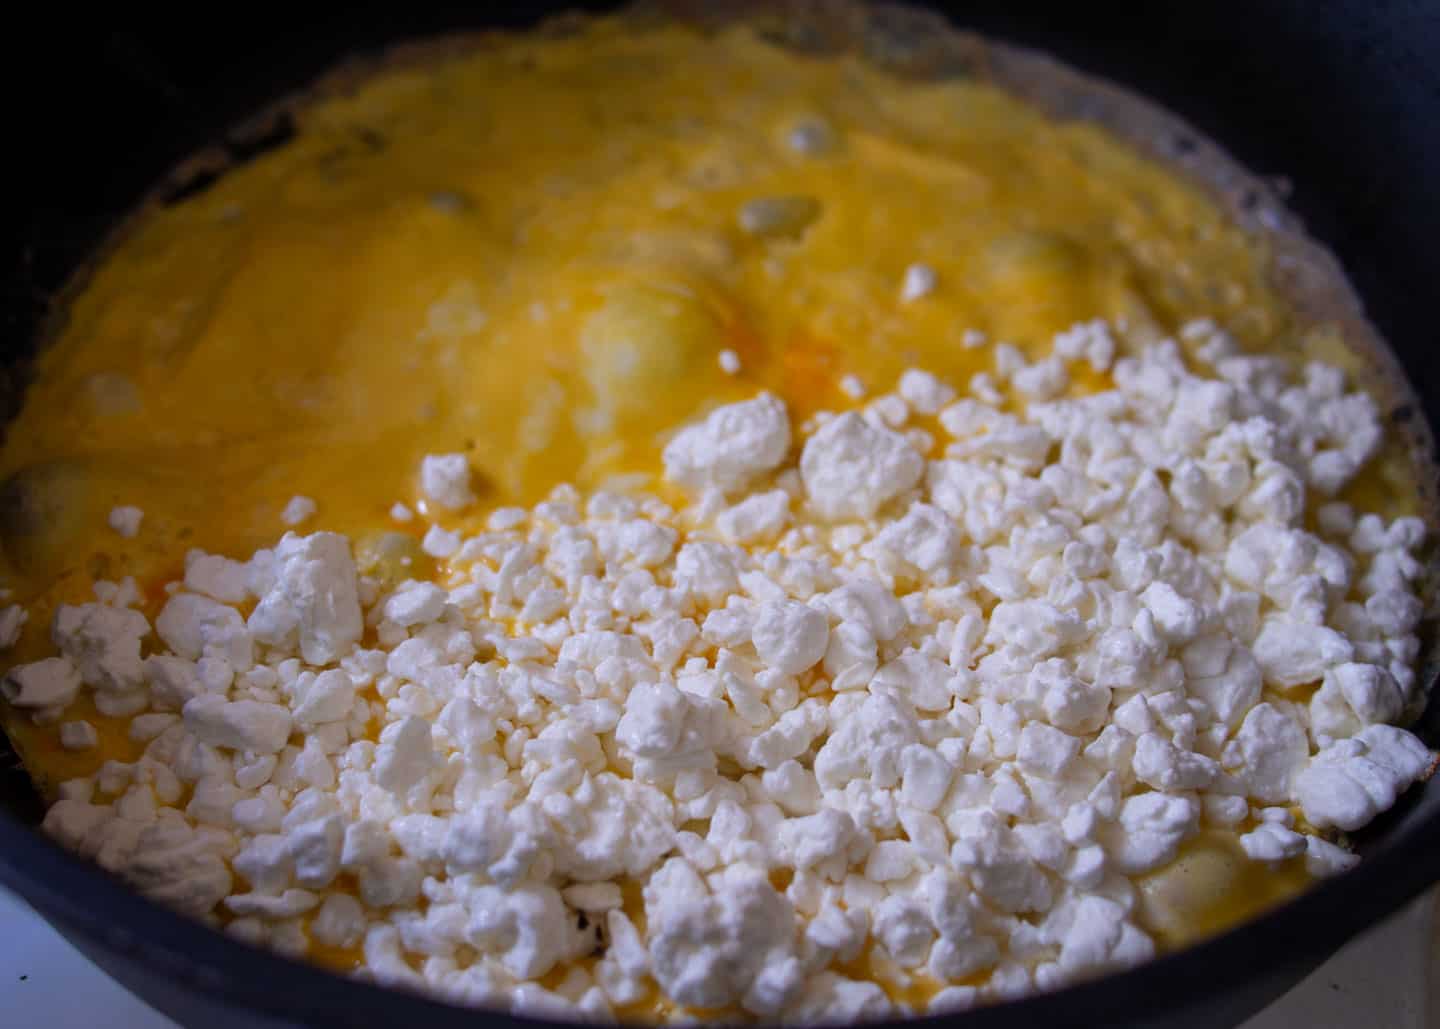 Dry cottage cheese on half of the eggs in frying pan